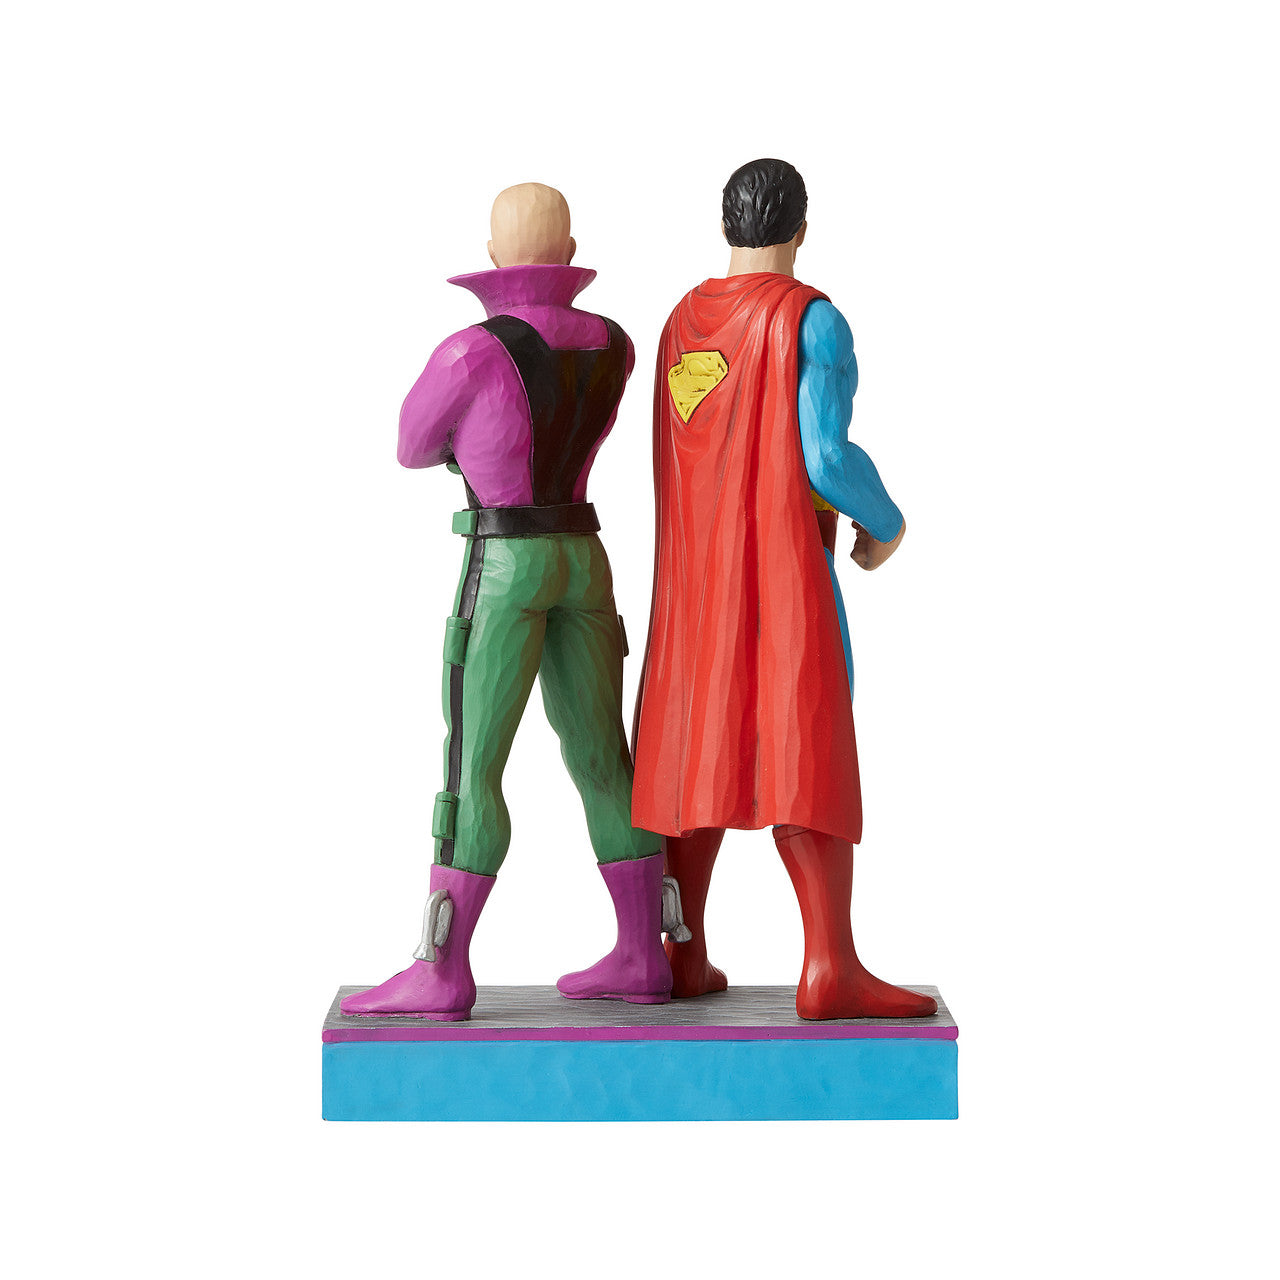 Jim Shore Superman and Lex Luthor Figurine  Jim Shore celebrates Superman and Lex Luther back to back in his signature wood carved look and folk art styling. Sure to be a treasured gift across the generations.